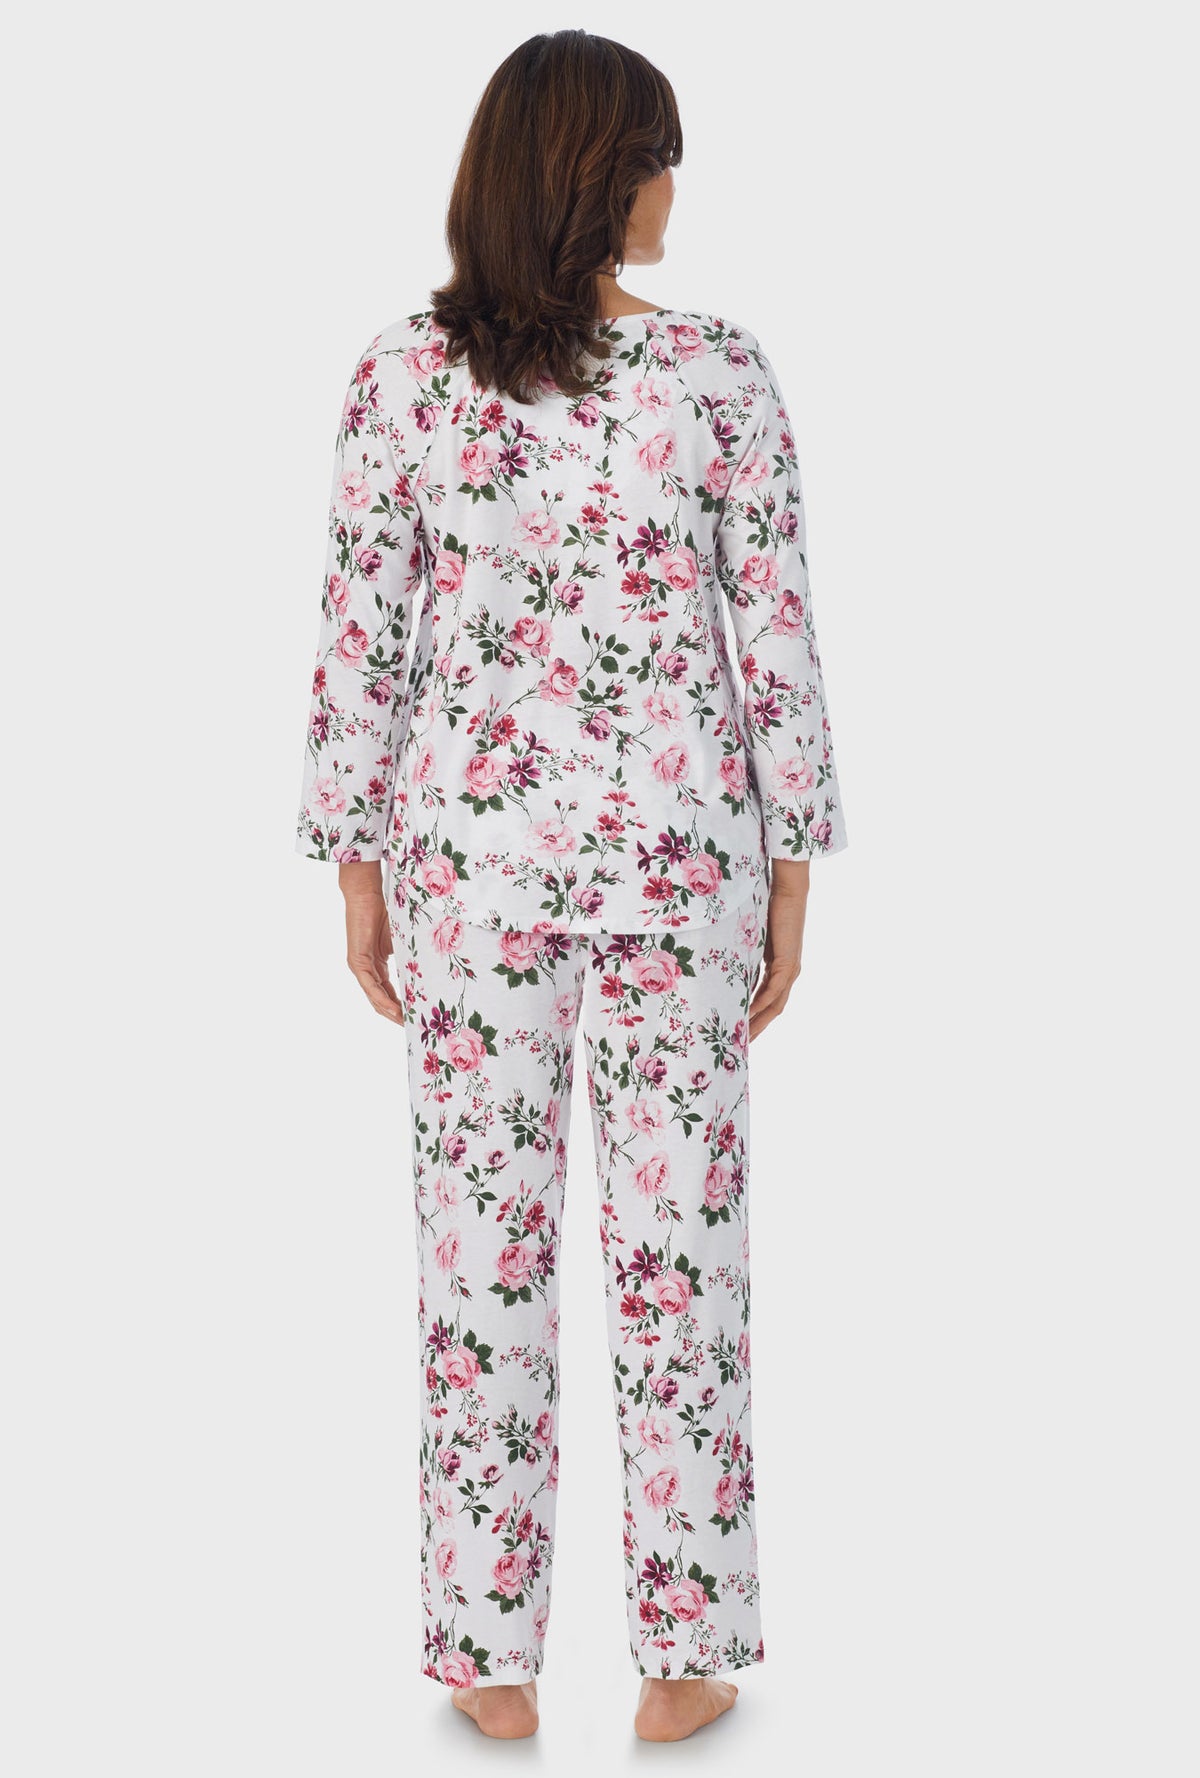 A lady wearing 3/4 Sleeve Long Pant PJ Set with Pink and Berry Roses   print